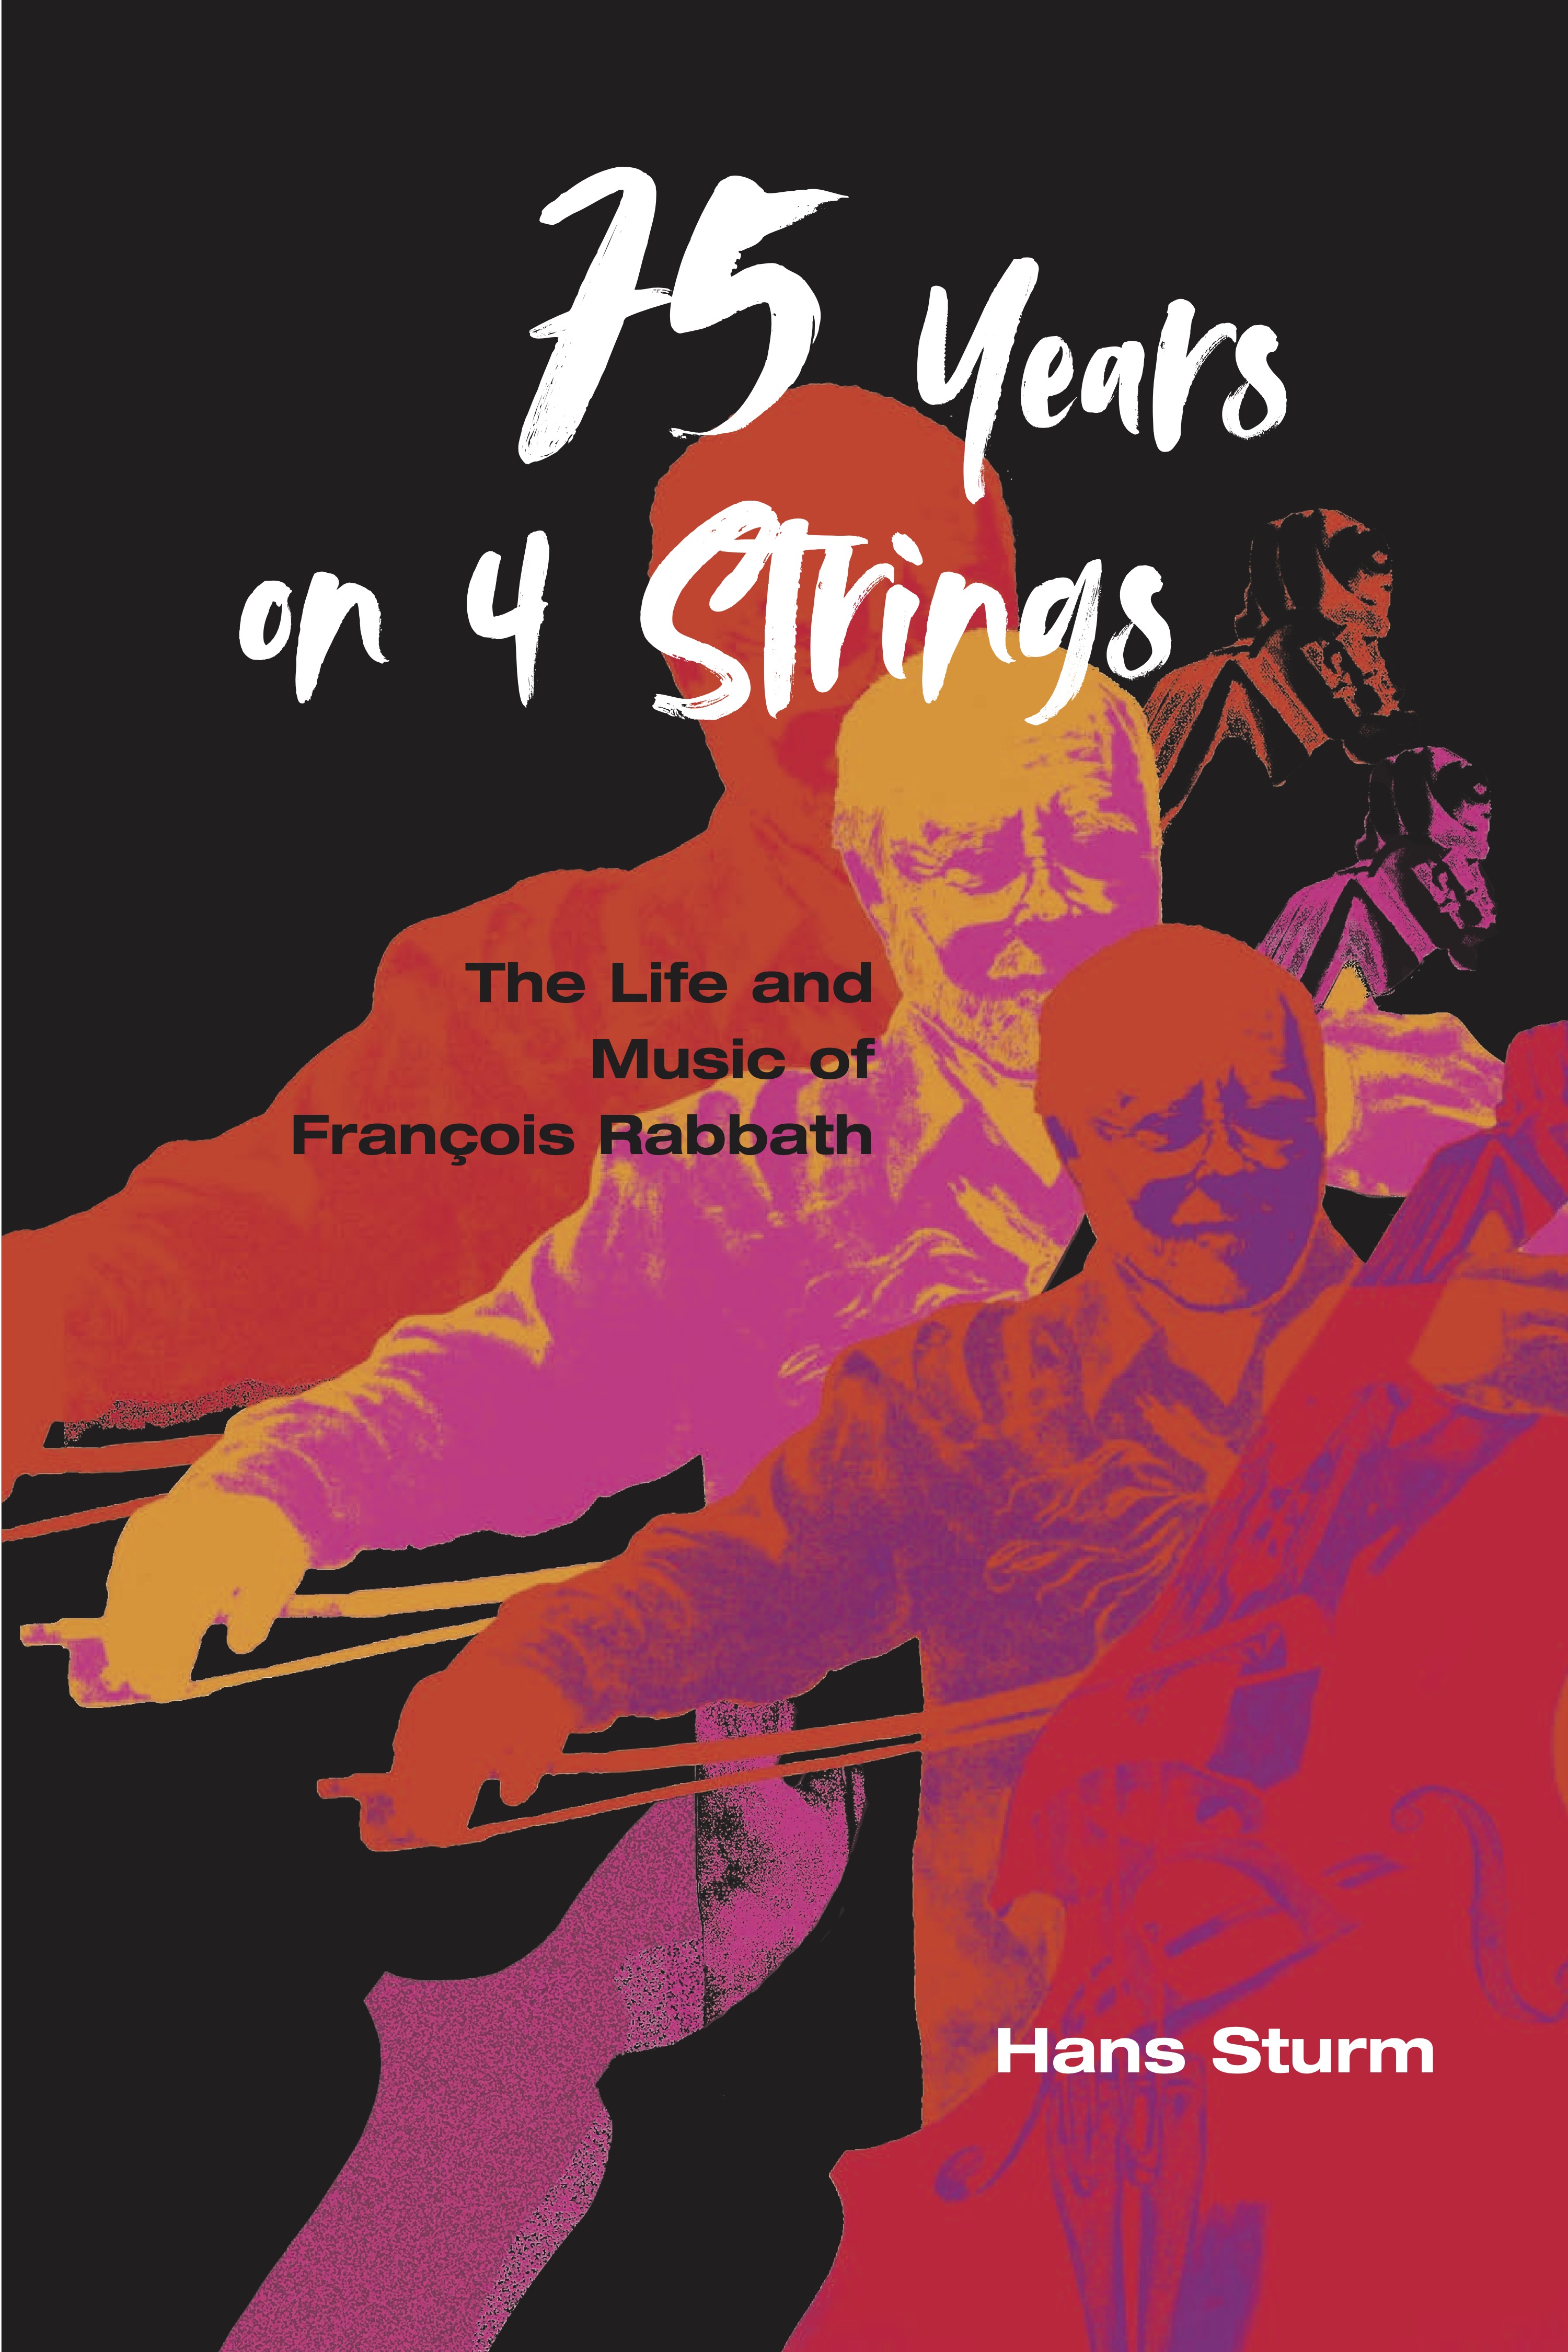 Hans Sturm’s “75 Years on 4 Strings: The Life and Music of François Rabbath,” a biography of the legendary bassist, has been nominated for the 2023 Association for Recorded Sound Collections (ARSC) Awards for Excellence in Historical Recorded Sound Resear